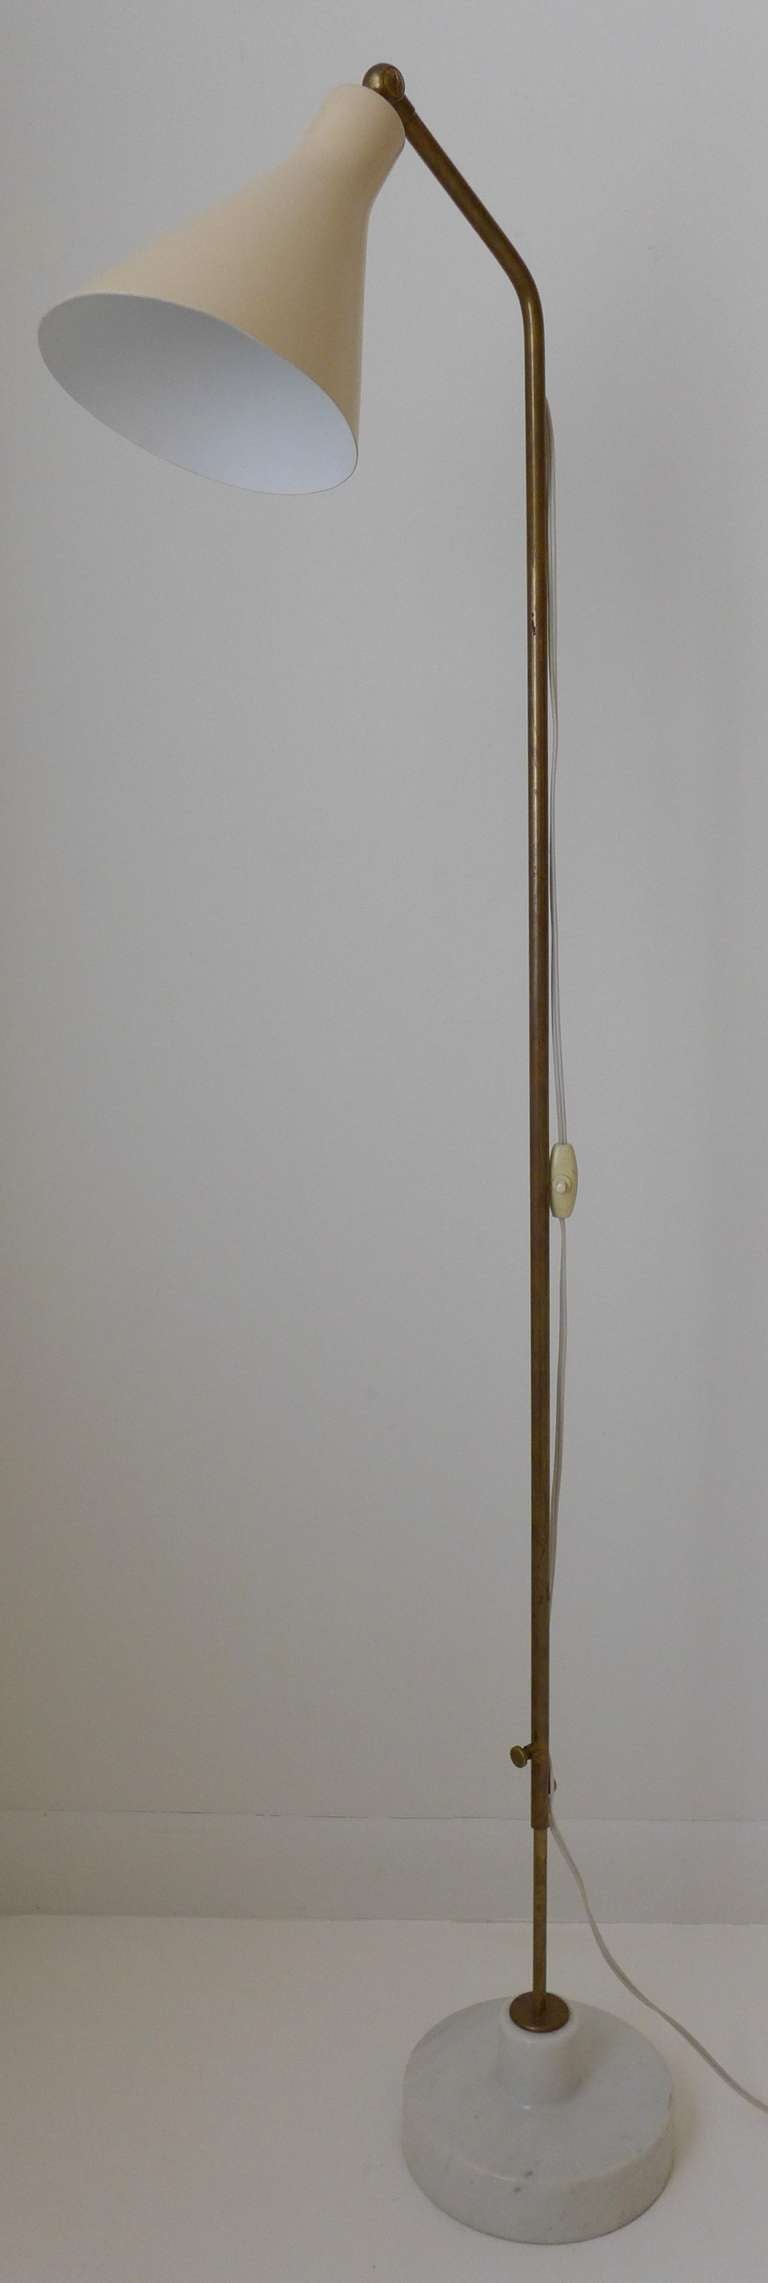 Floor lamp, model number Lte3, designed by Ignazio Gardella and produced by Azucena, Italy, c. 1950.  An early  iteration of this design, with the first edition shade, tubular brass stem, and a carrara marble base.  In fine condition throughout,